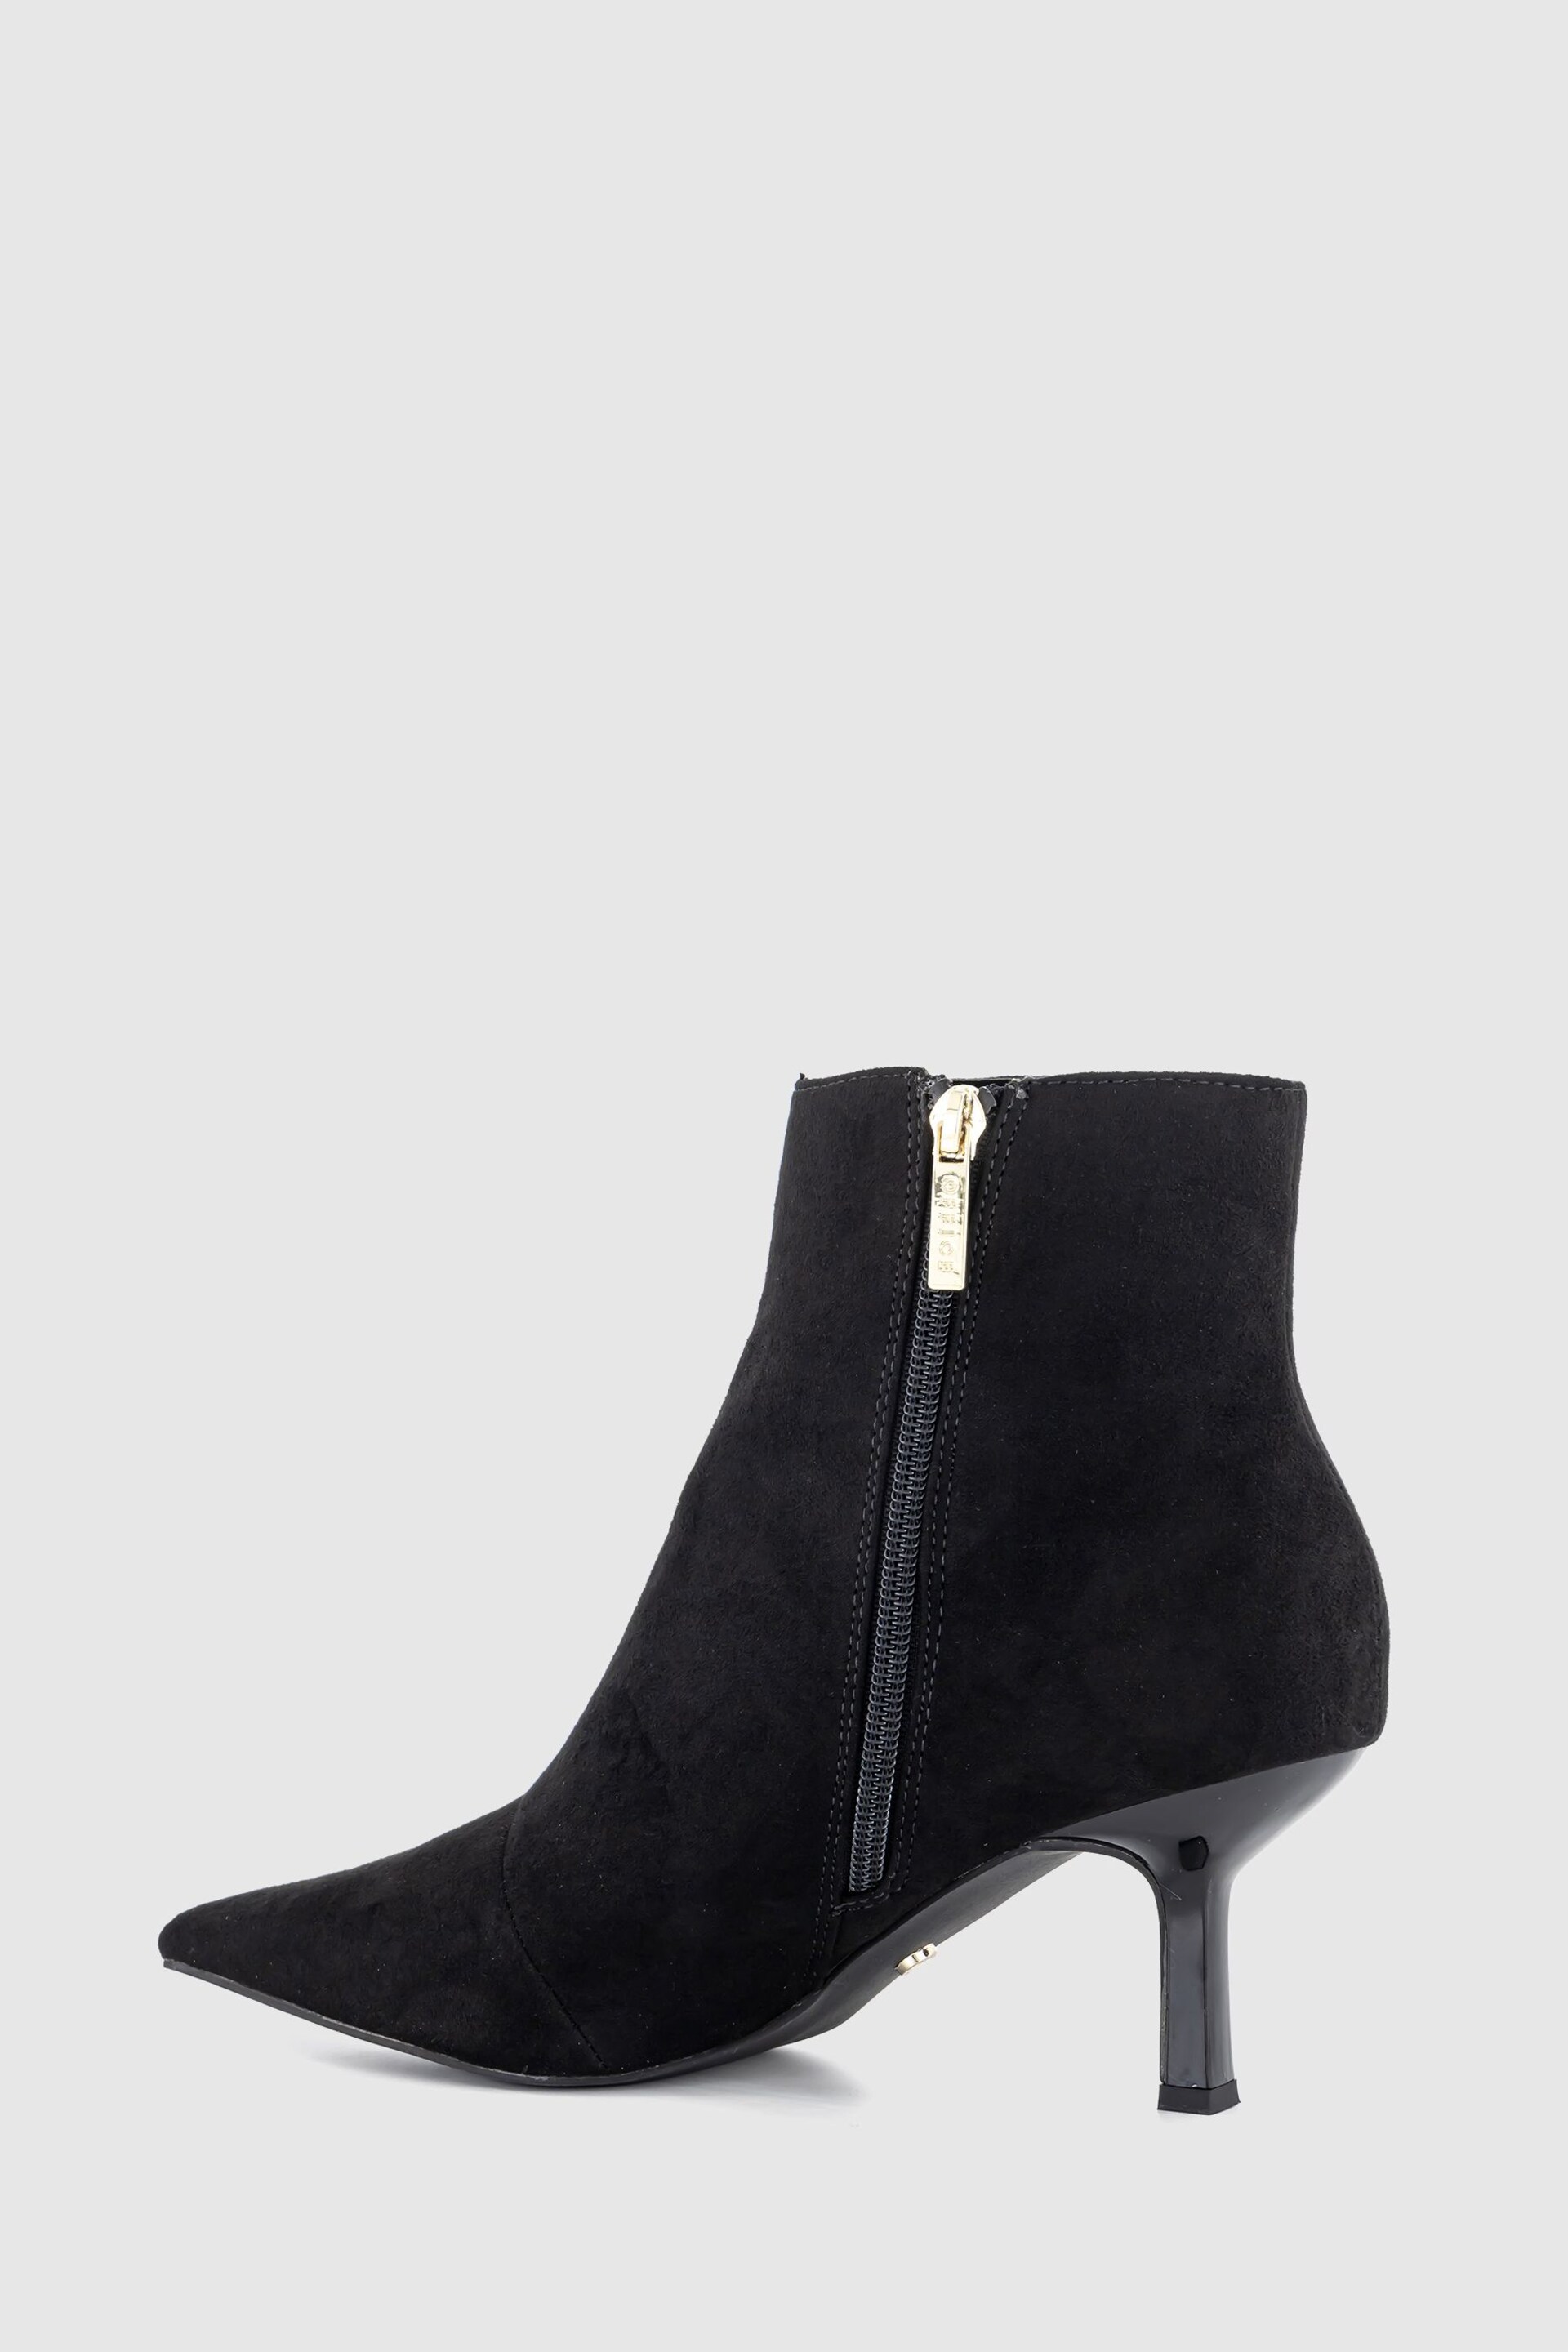 Office Black Ankle Sock Boot With Stiletto Heel - Image 2 of 4